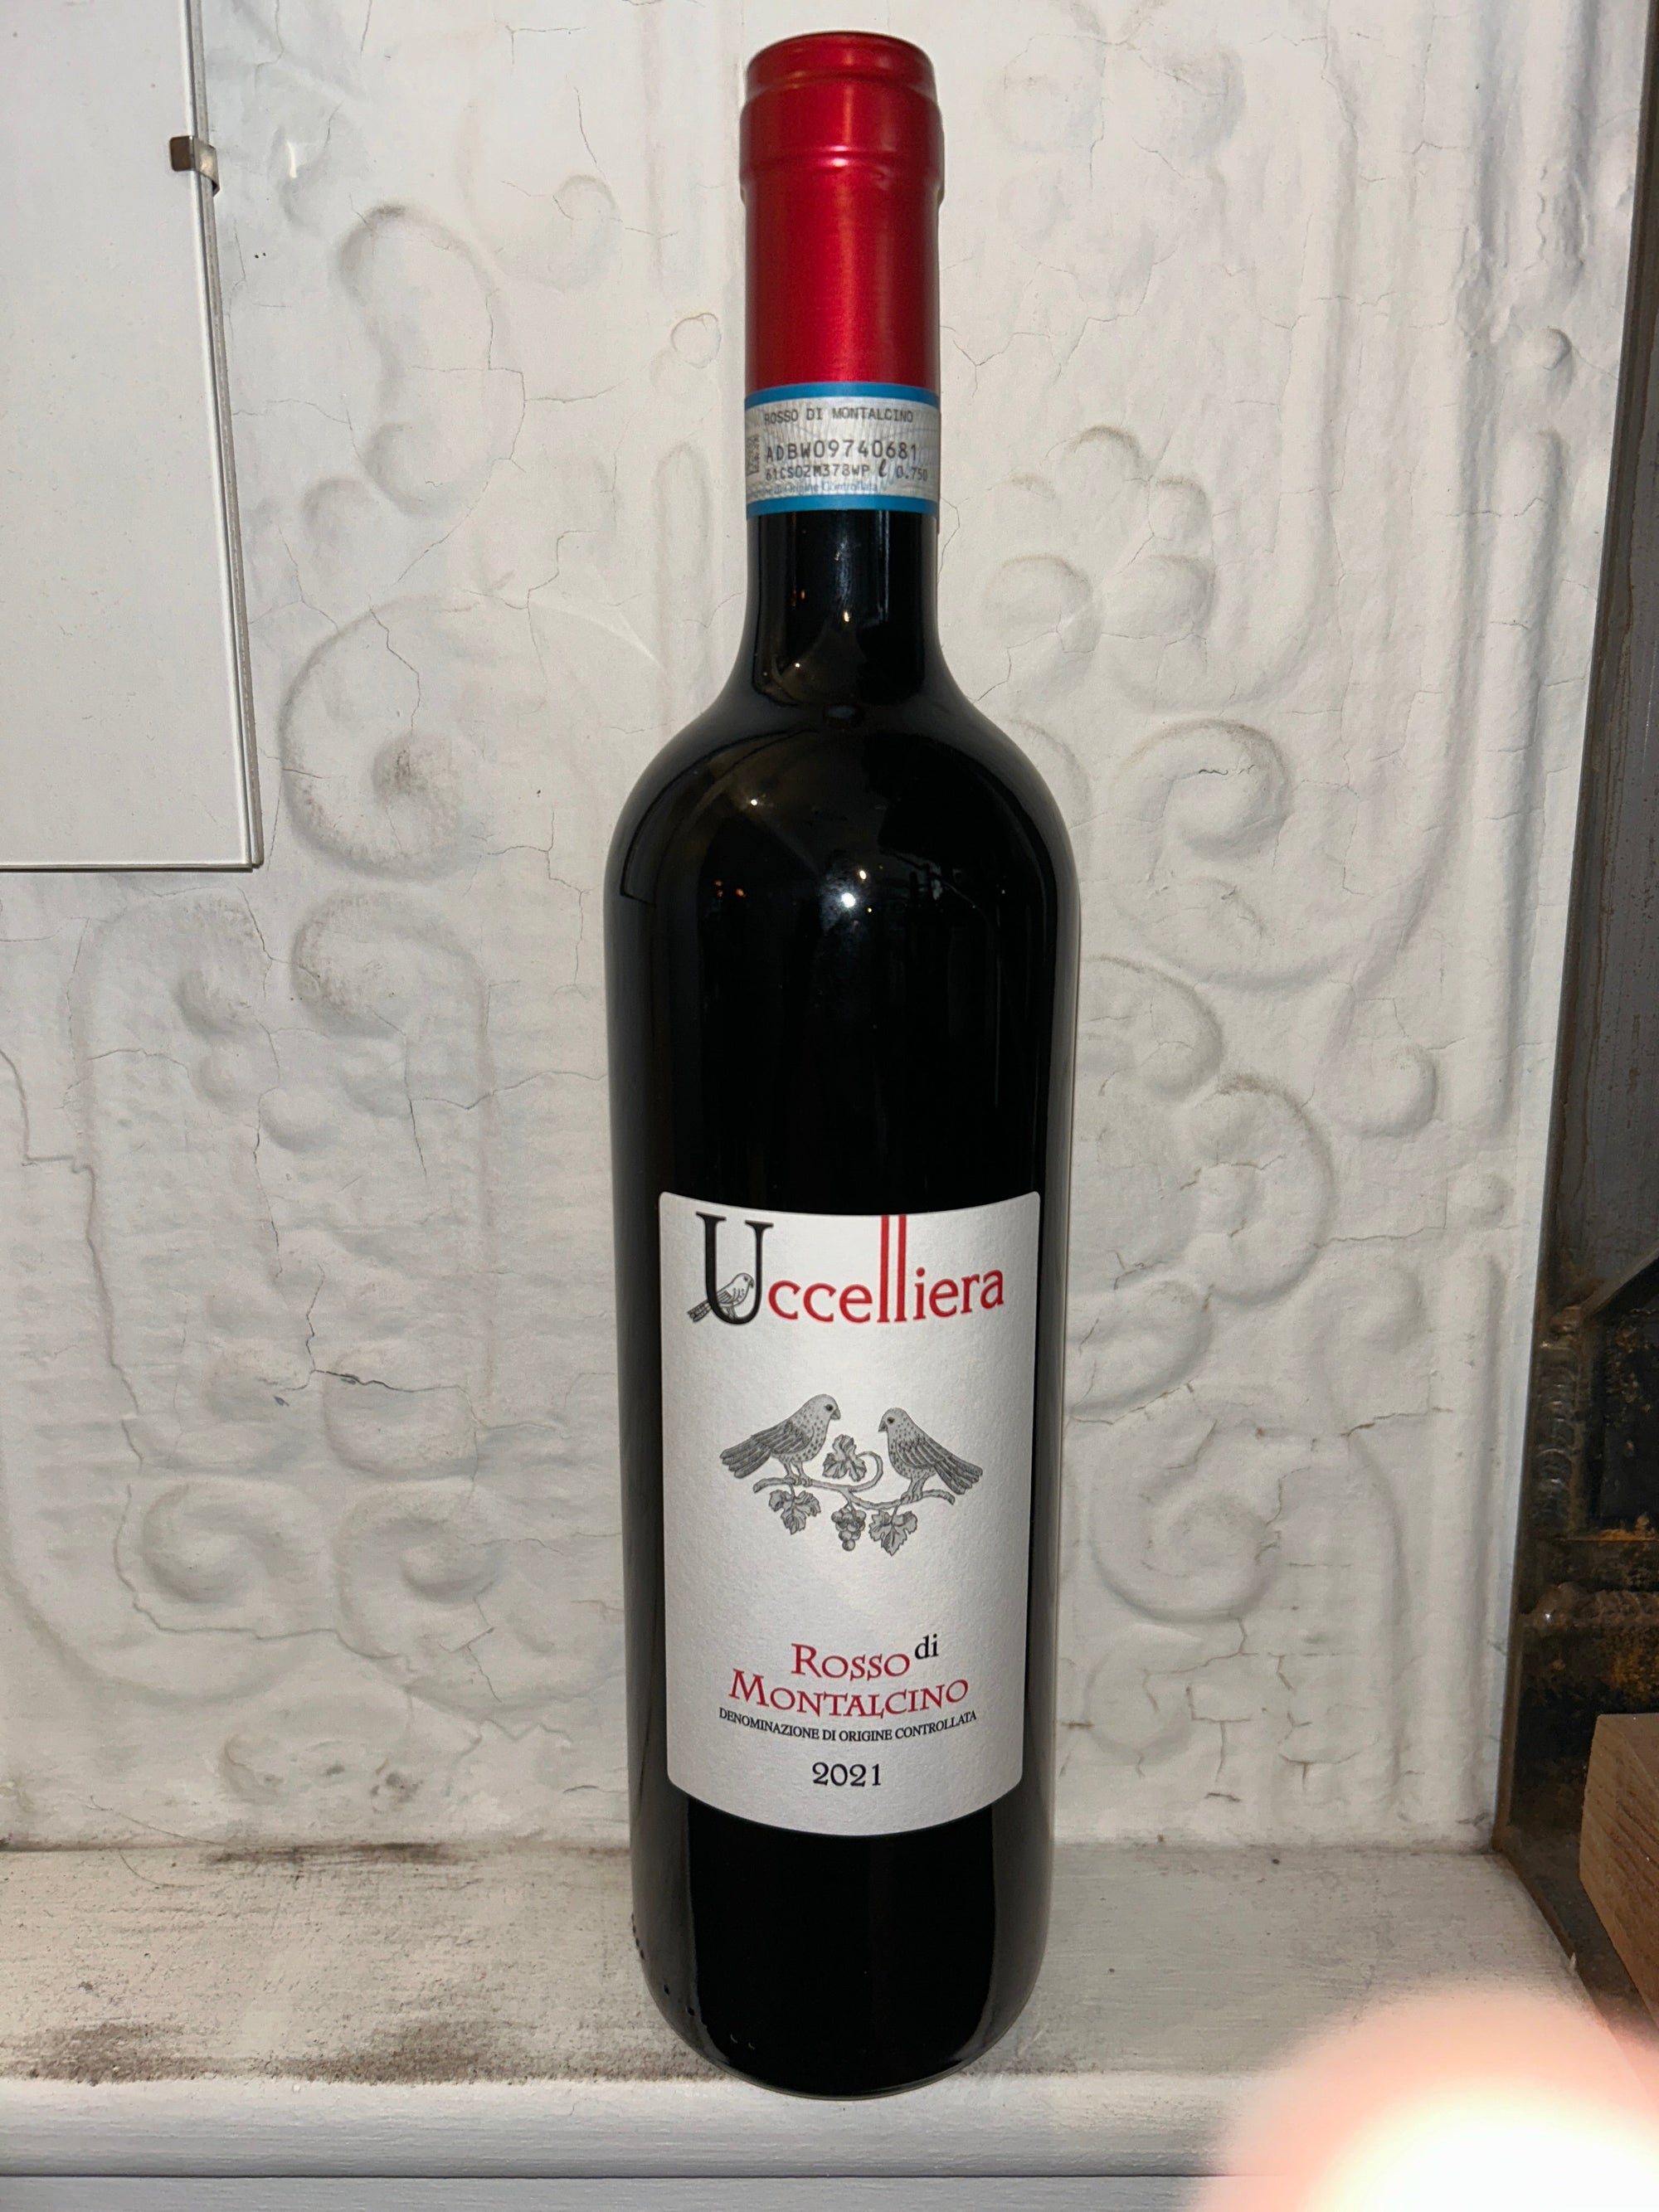 Rosso di Montalcino, Uccelliera 2021 (Tuscany, Italy)-Wine-Bibber & Bell